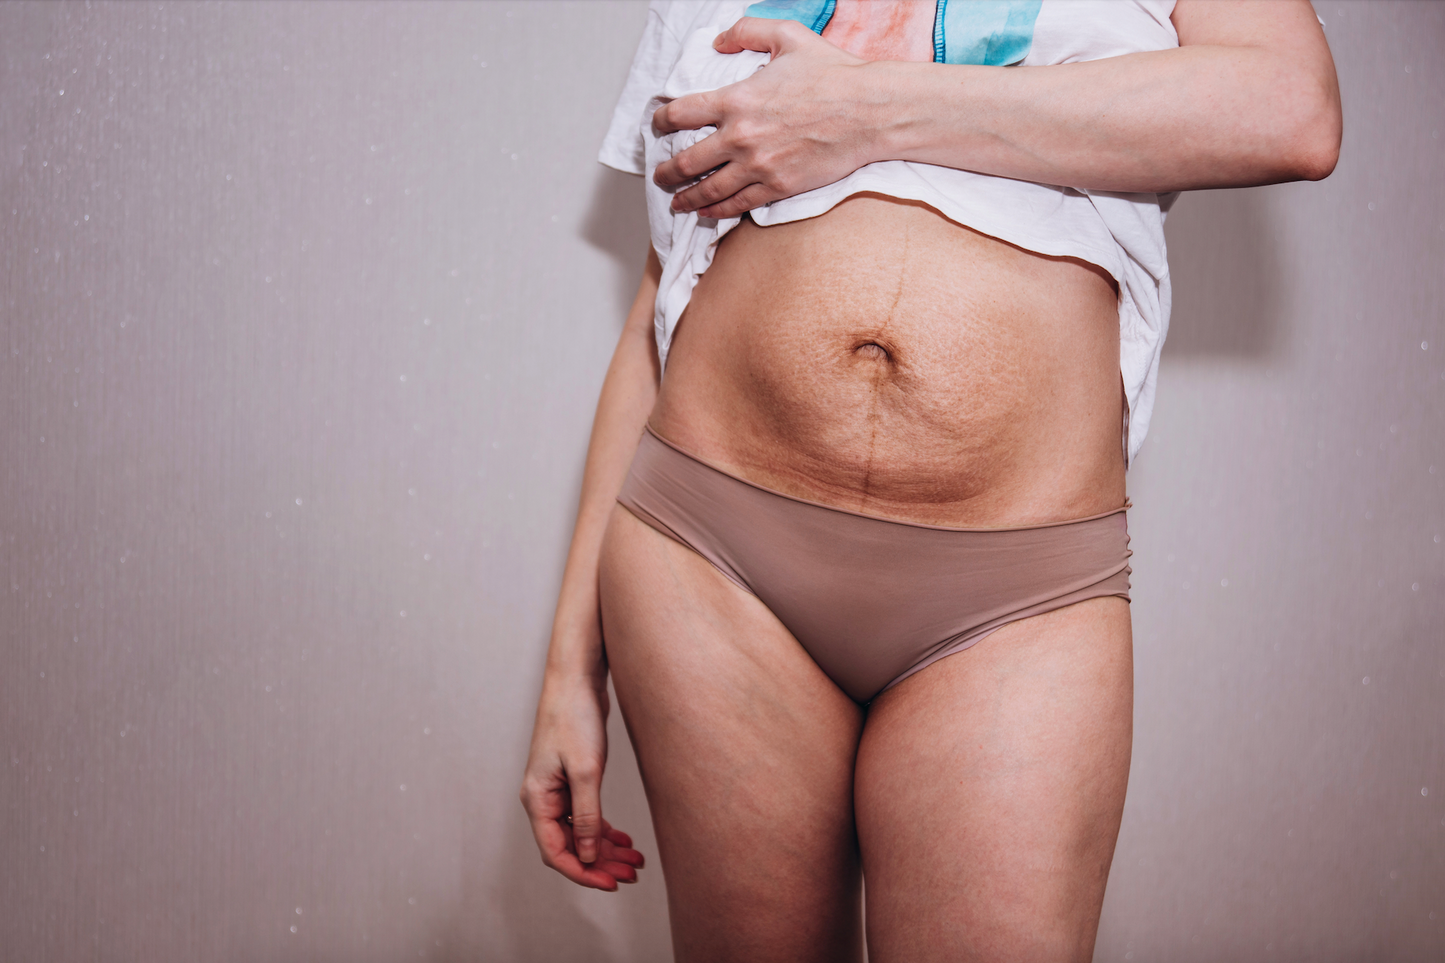 Do Stretch Marks Come From Losing Or Gaining Weight? – Rejûvaskin